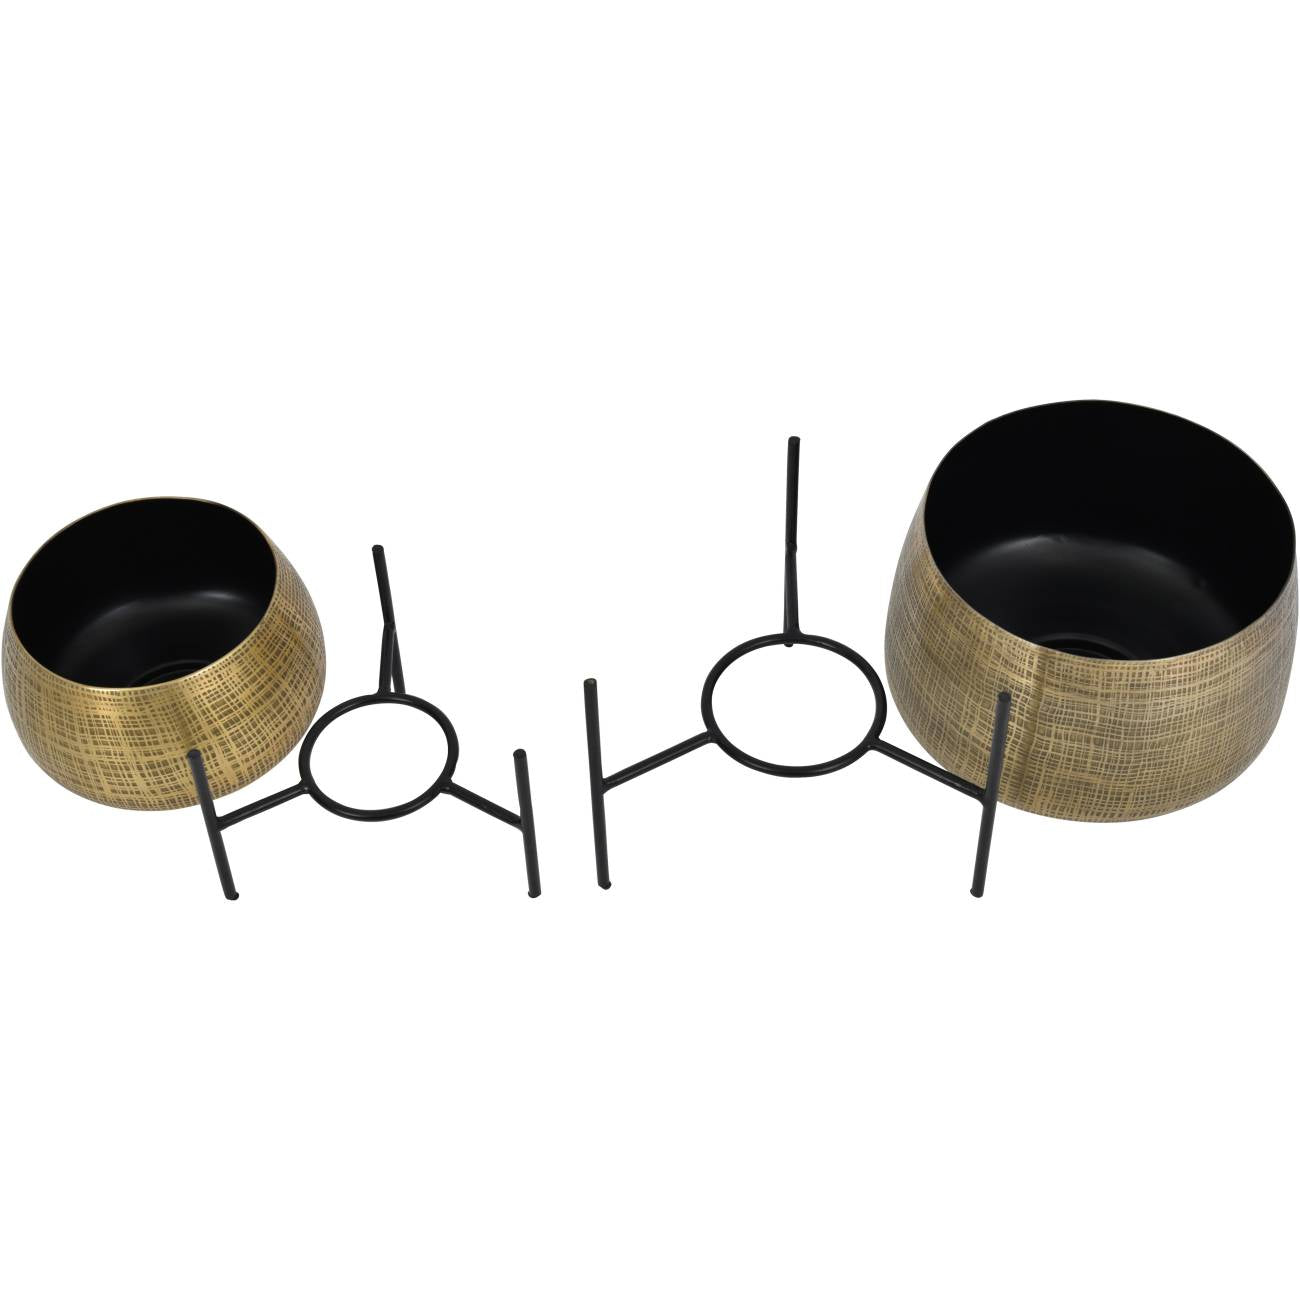 Clyde Tabletop Brass Set of 2 Planters on Black Stands